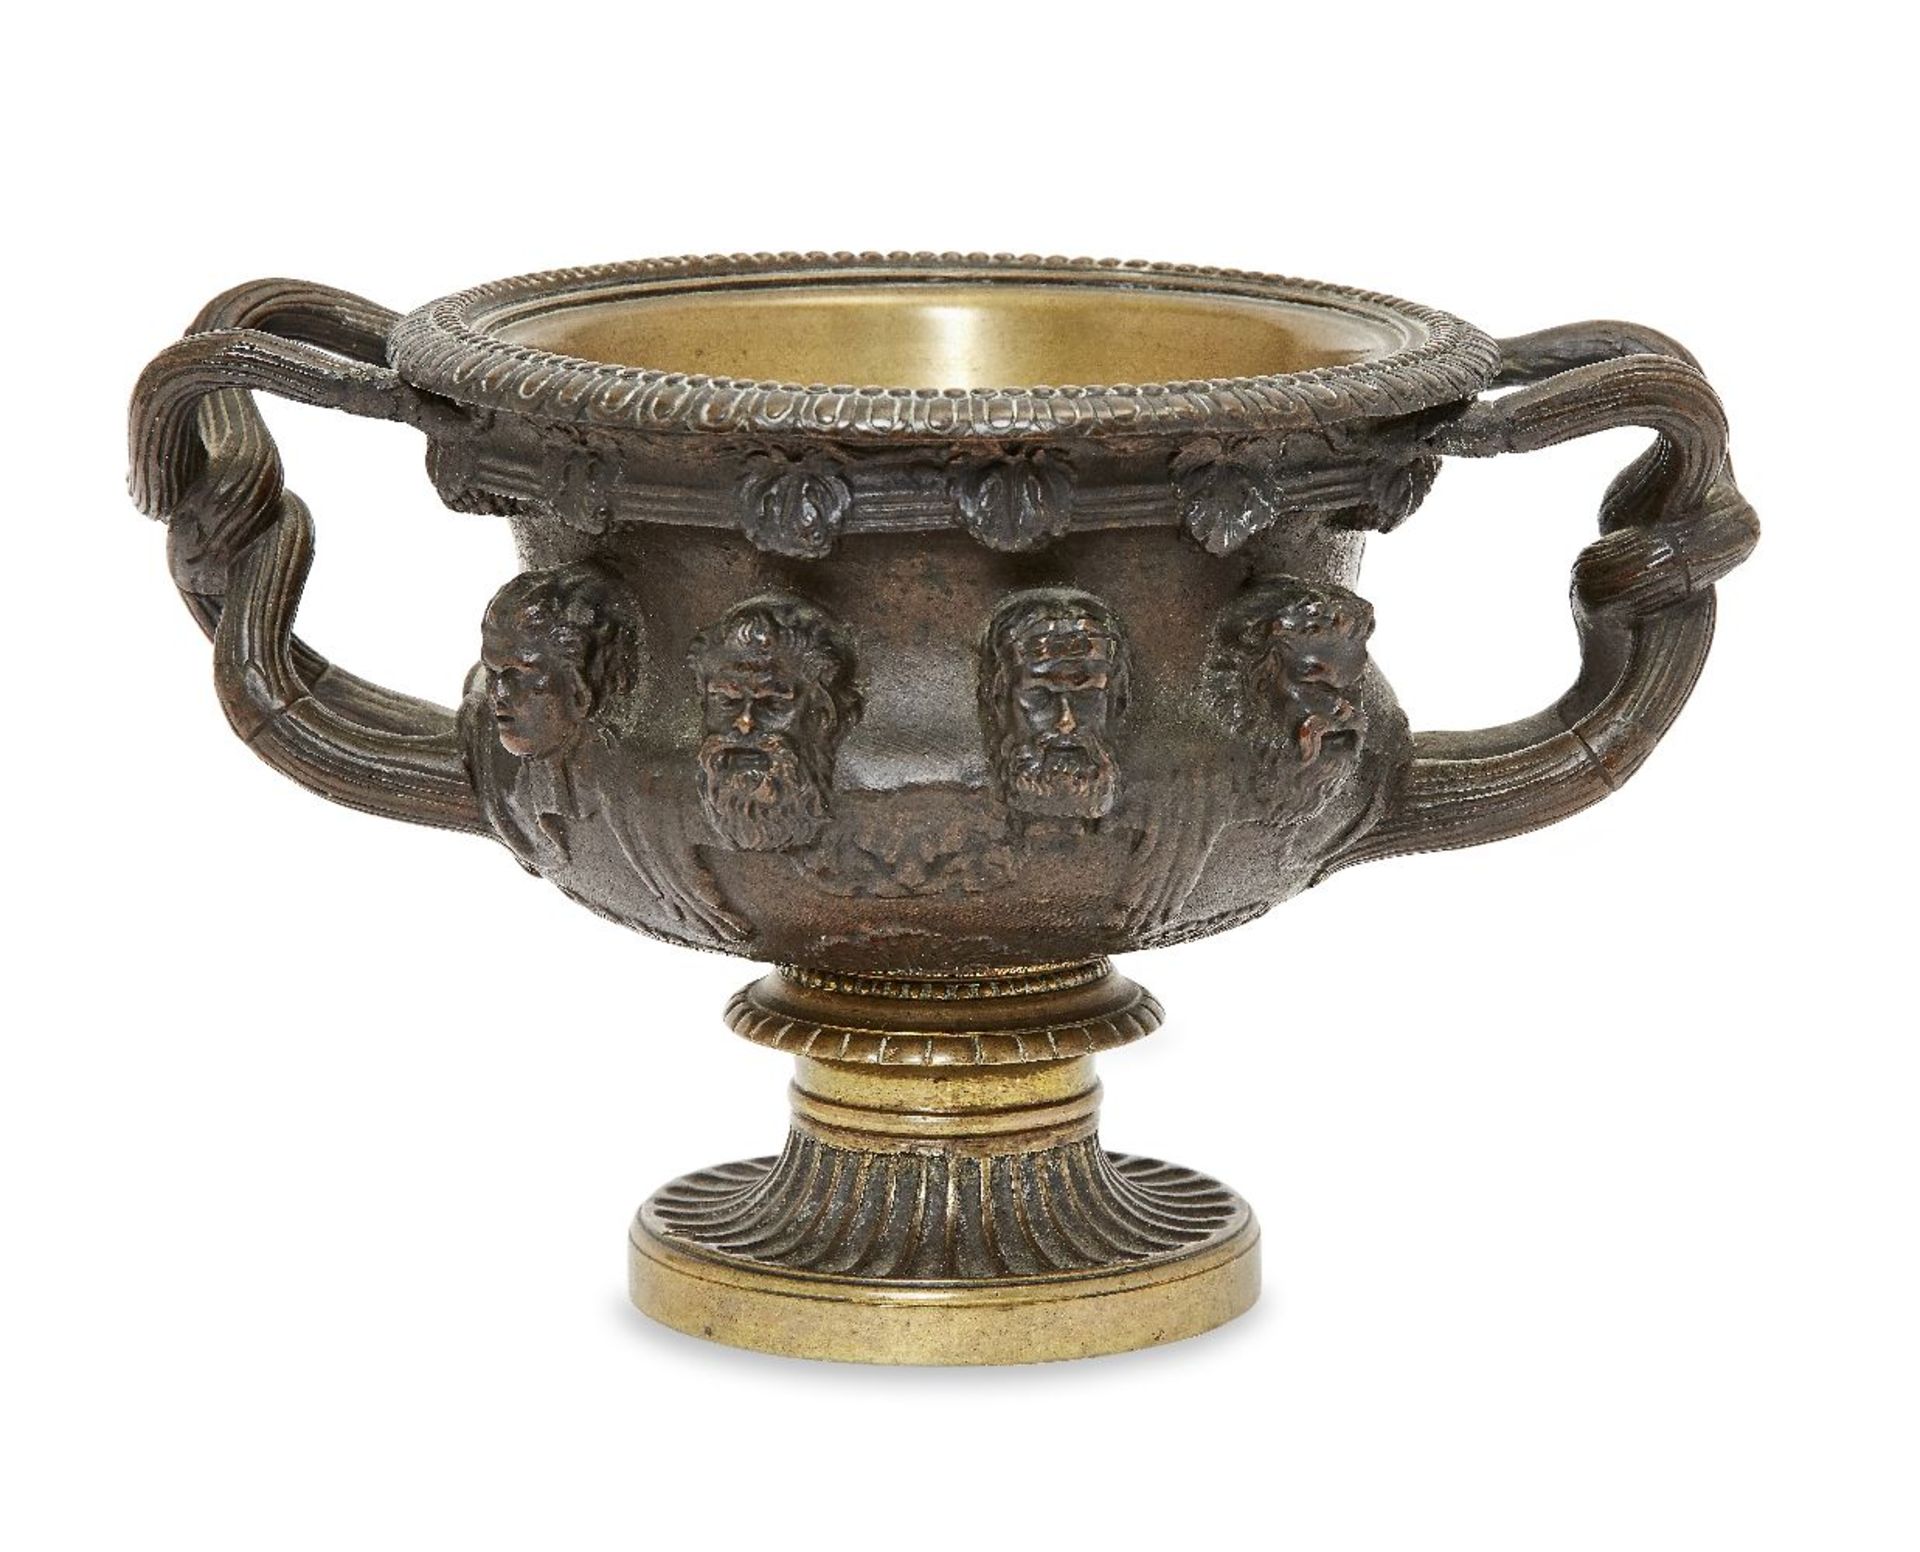 A French bronze model of the Warwick vase, late 19th century, after the antique, inscribed Societe